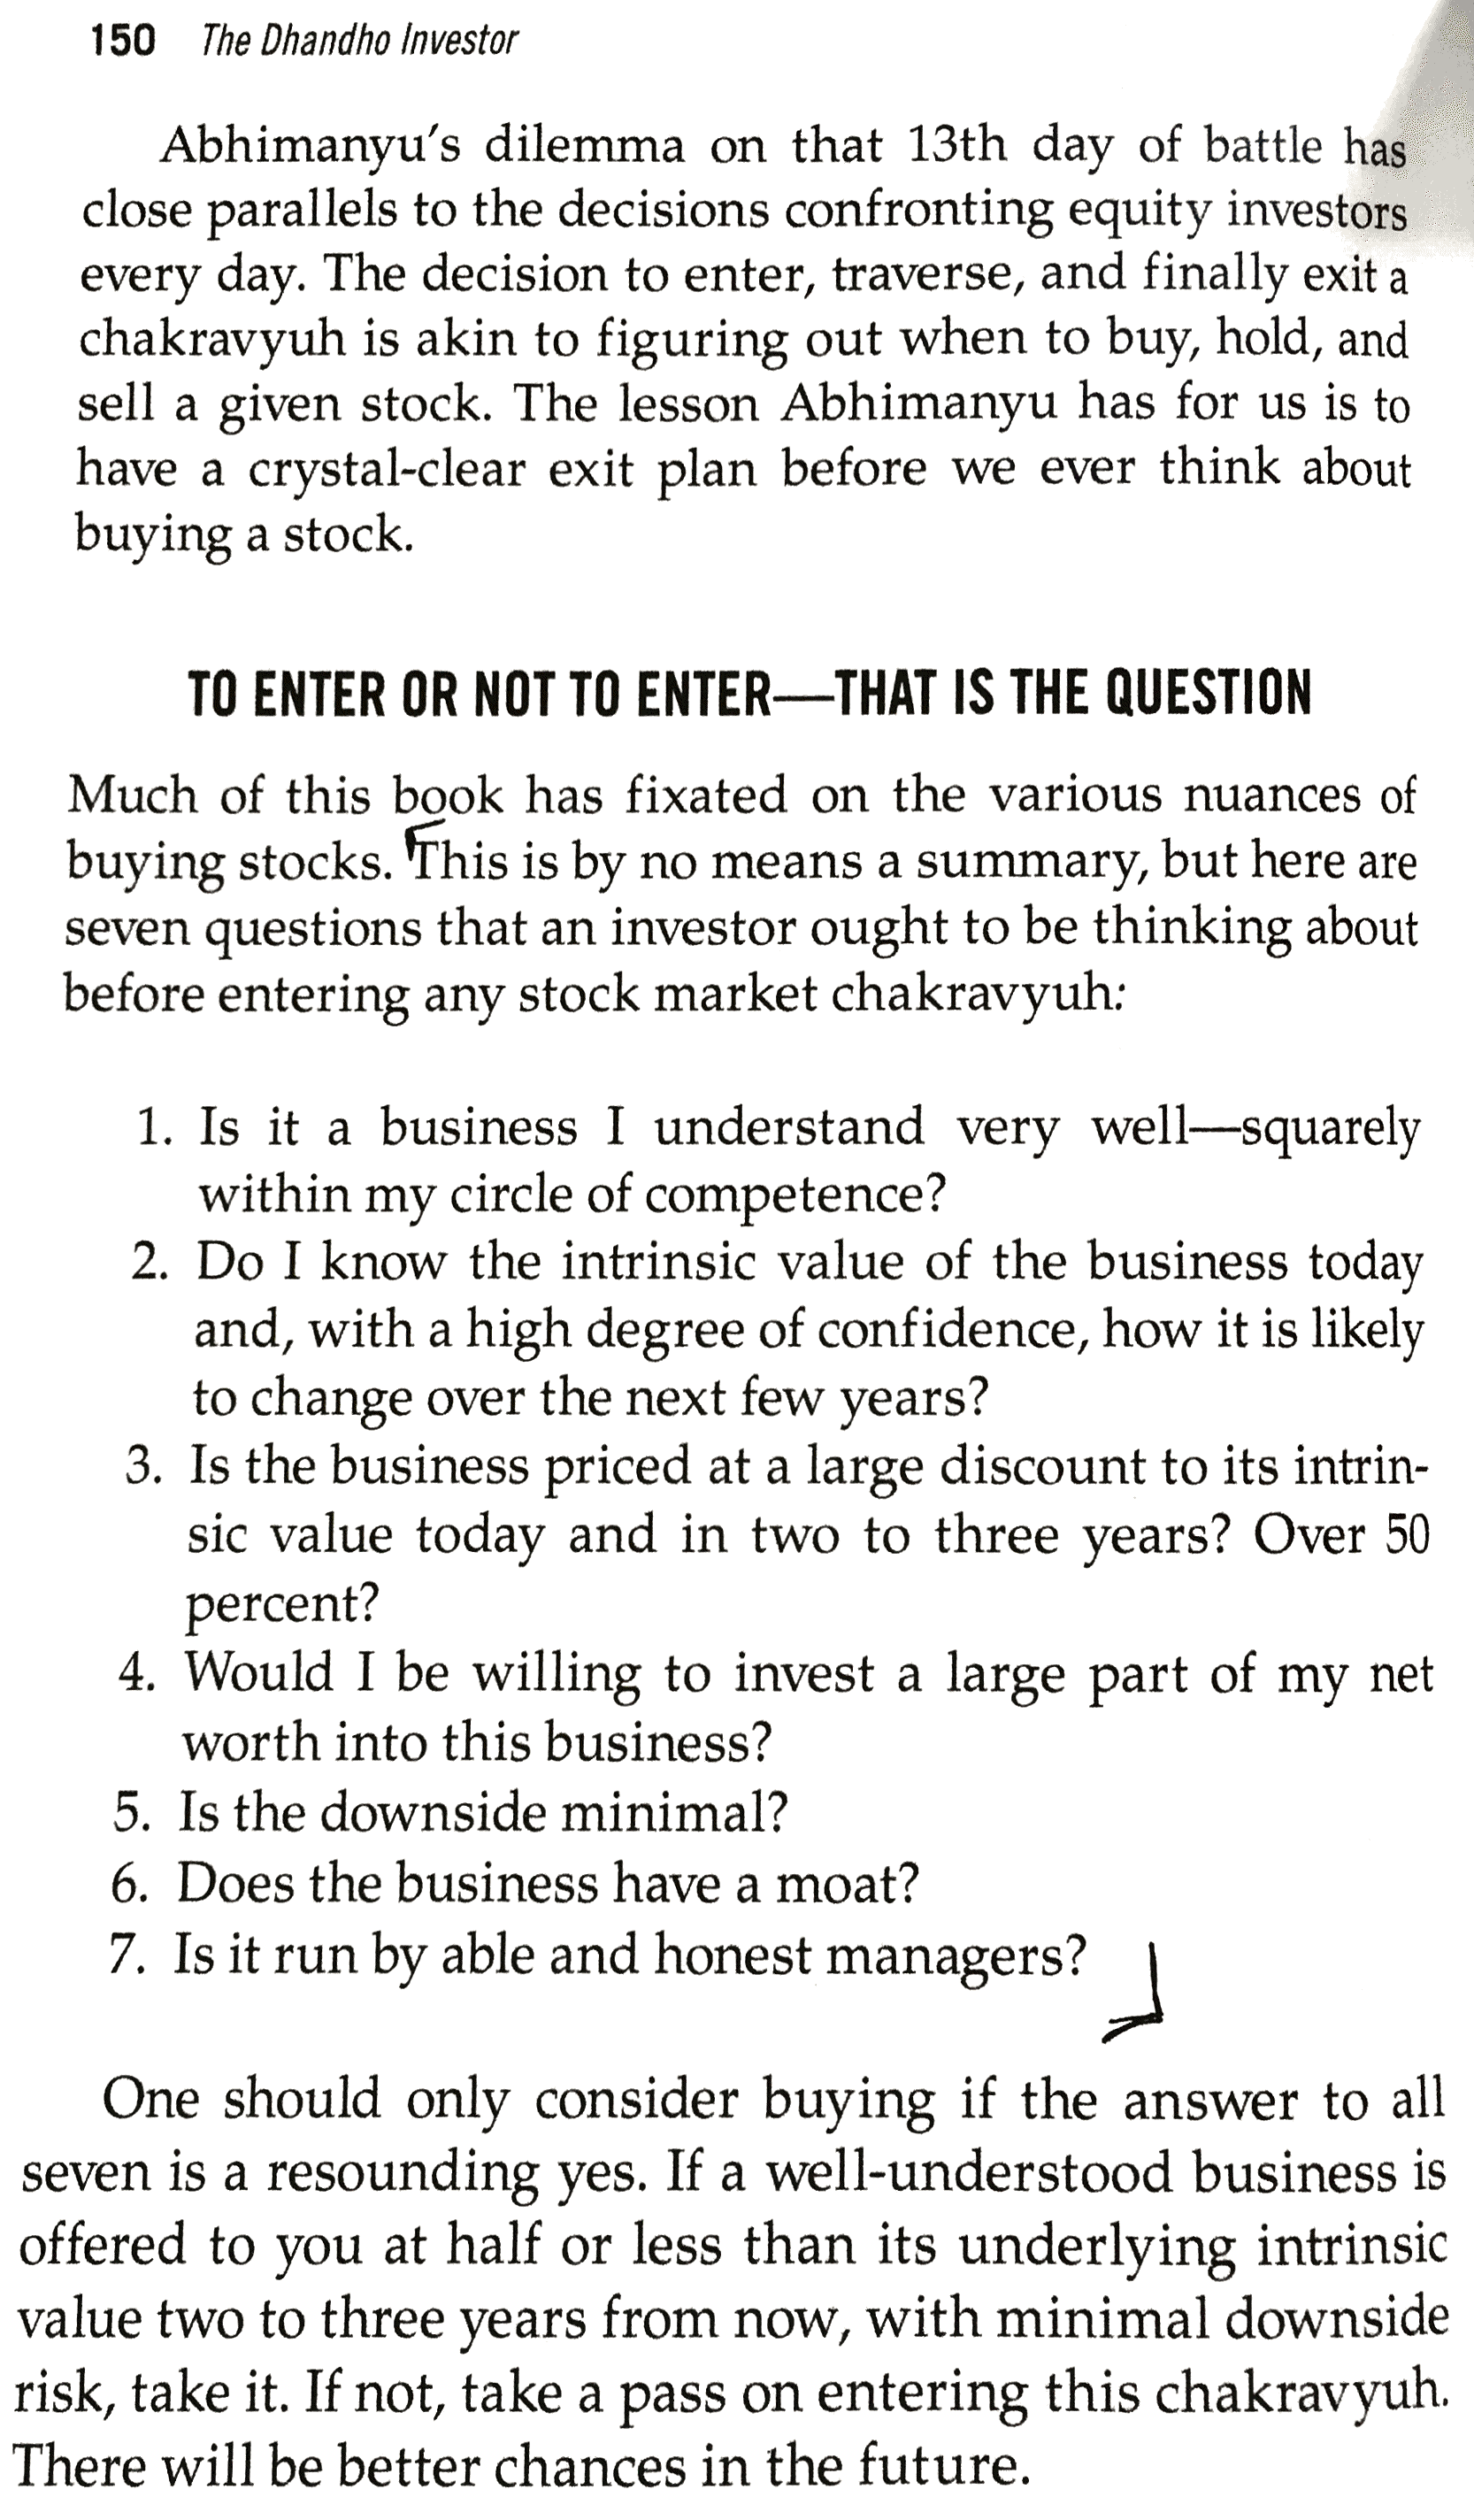 dhandho investor book